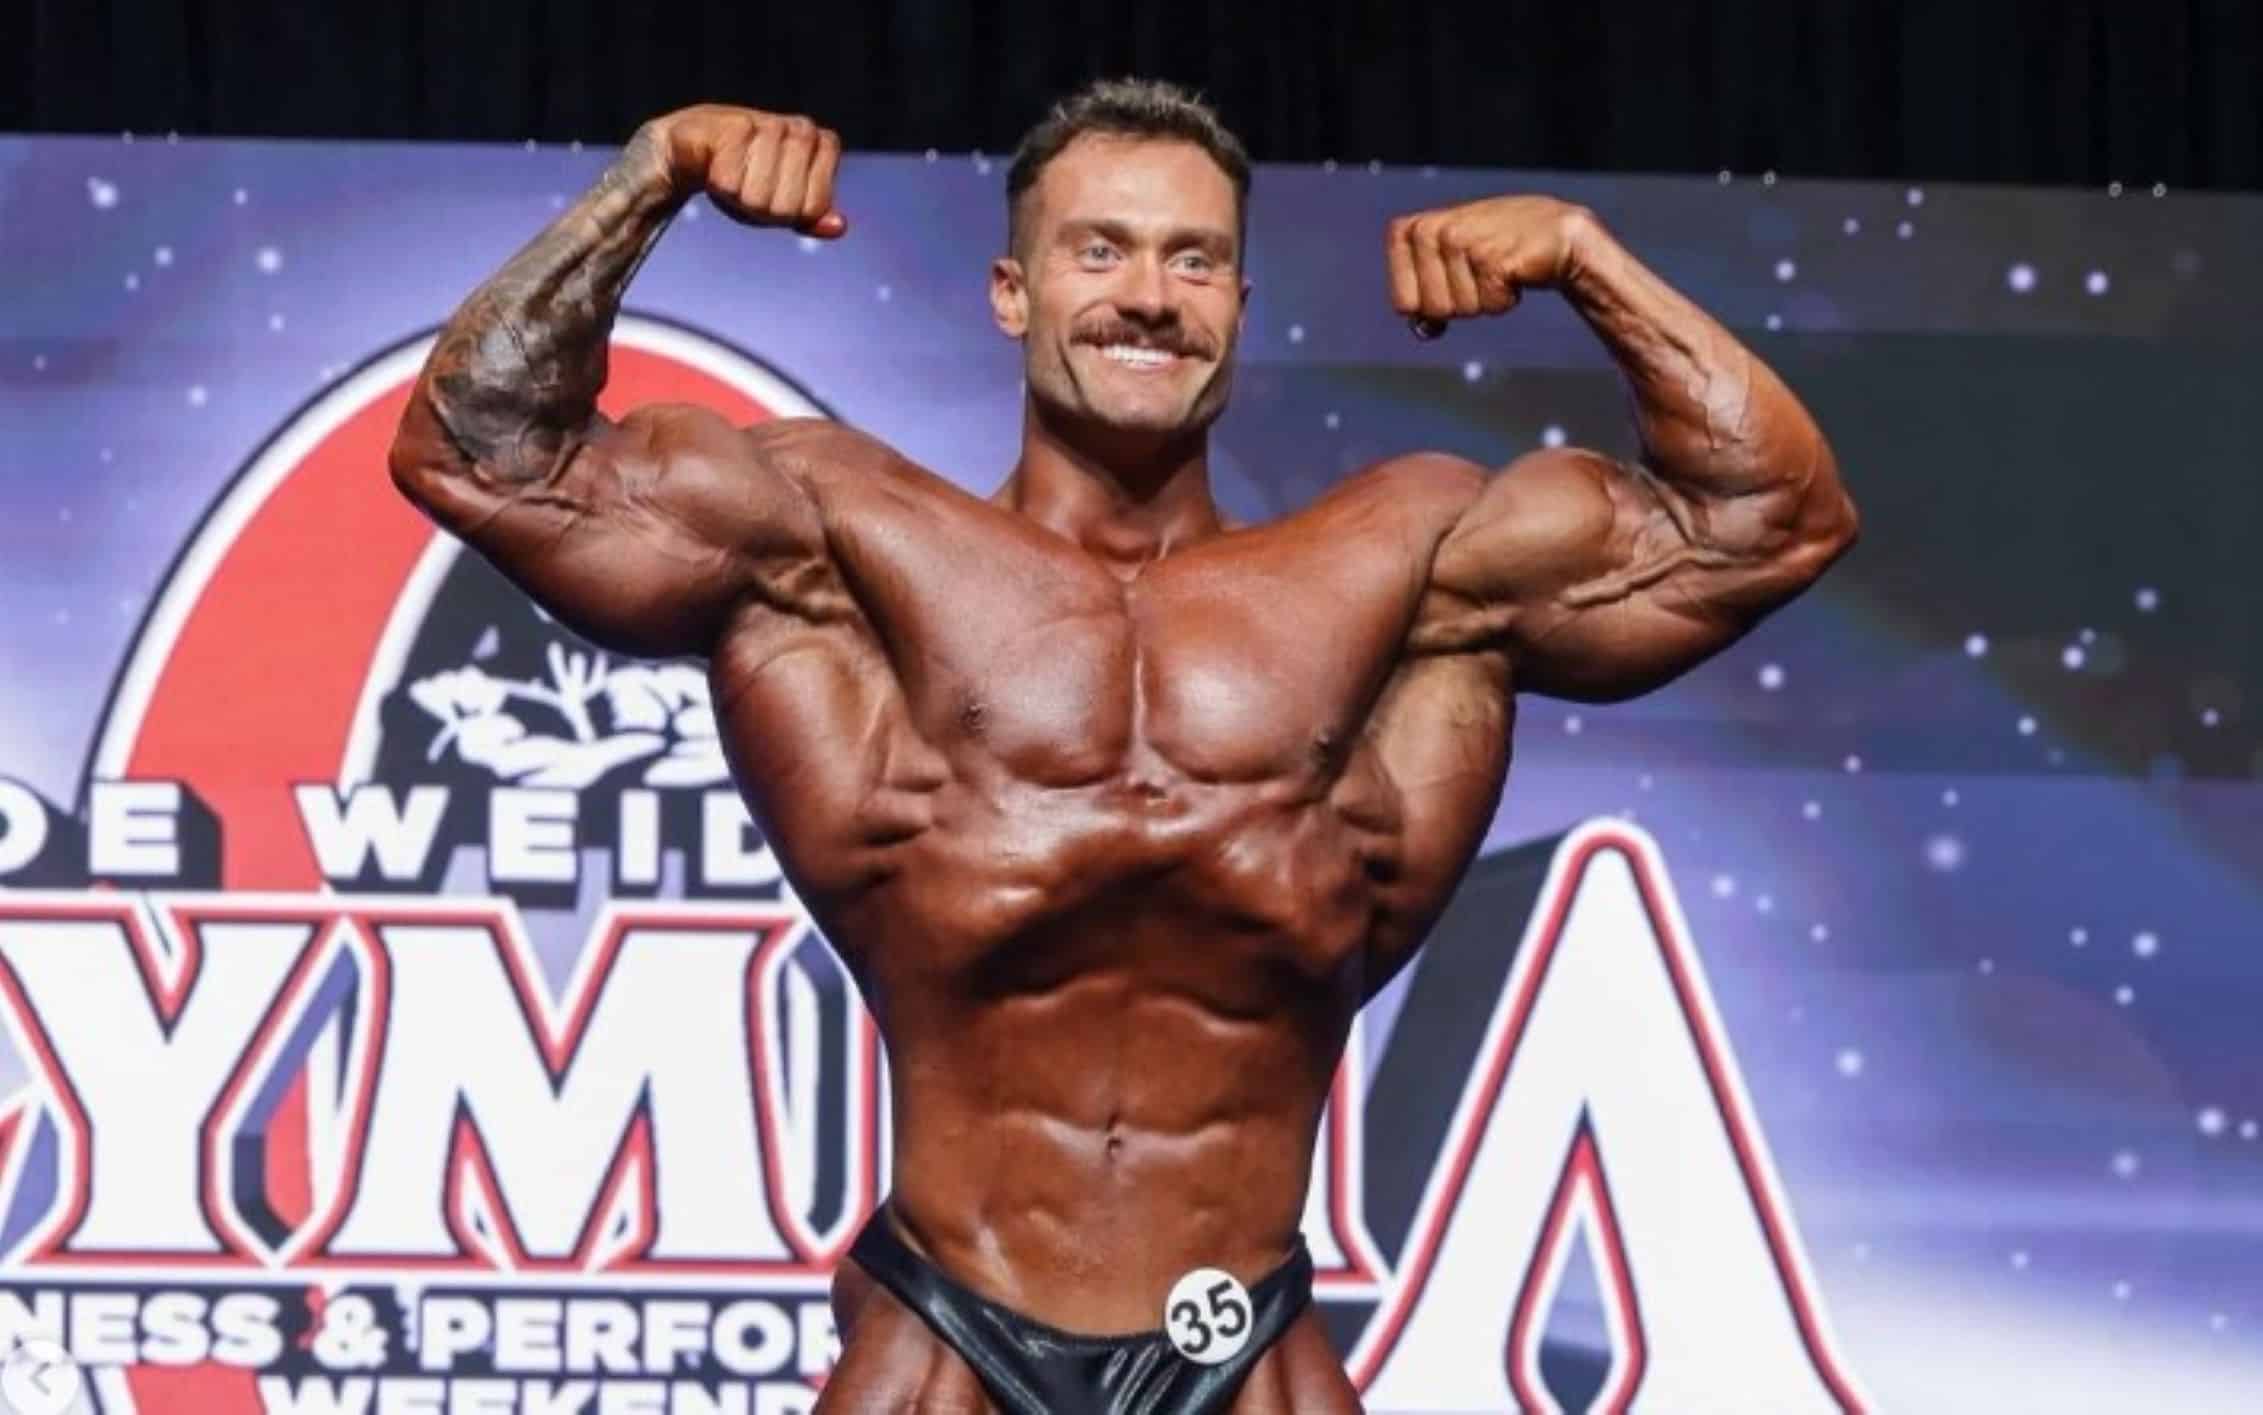 Mr. Olympia 2023 Classic Physique Pre-Judging Results Are Out And Here Are  the 6 Bodybuilders that Made It In the First Callout - EssentiallySports